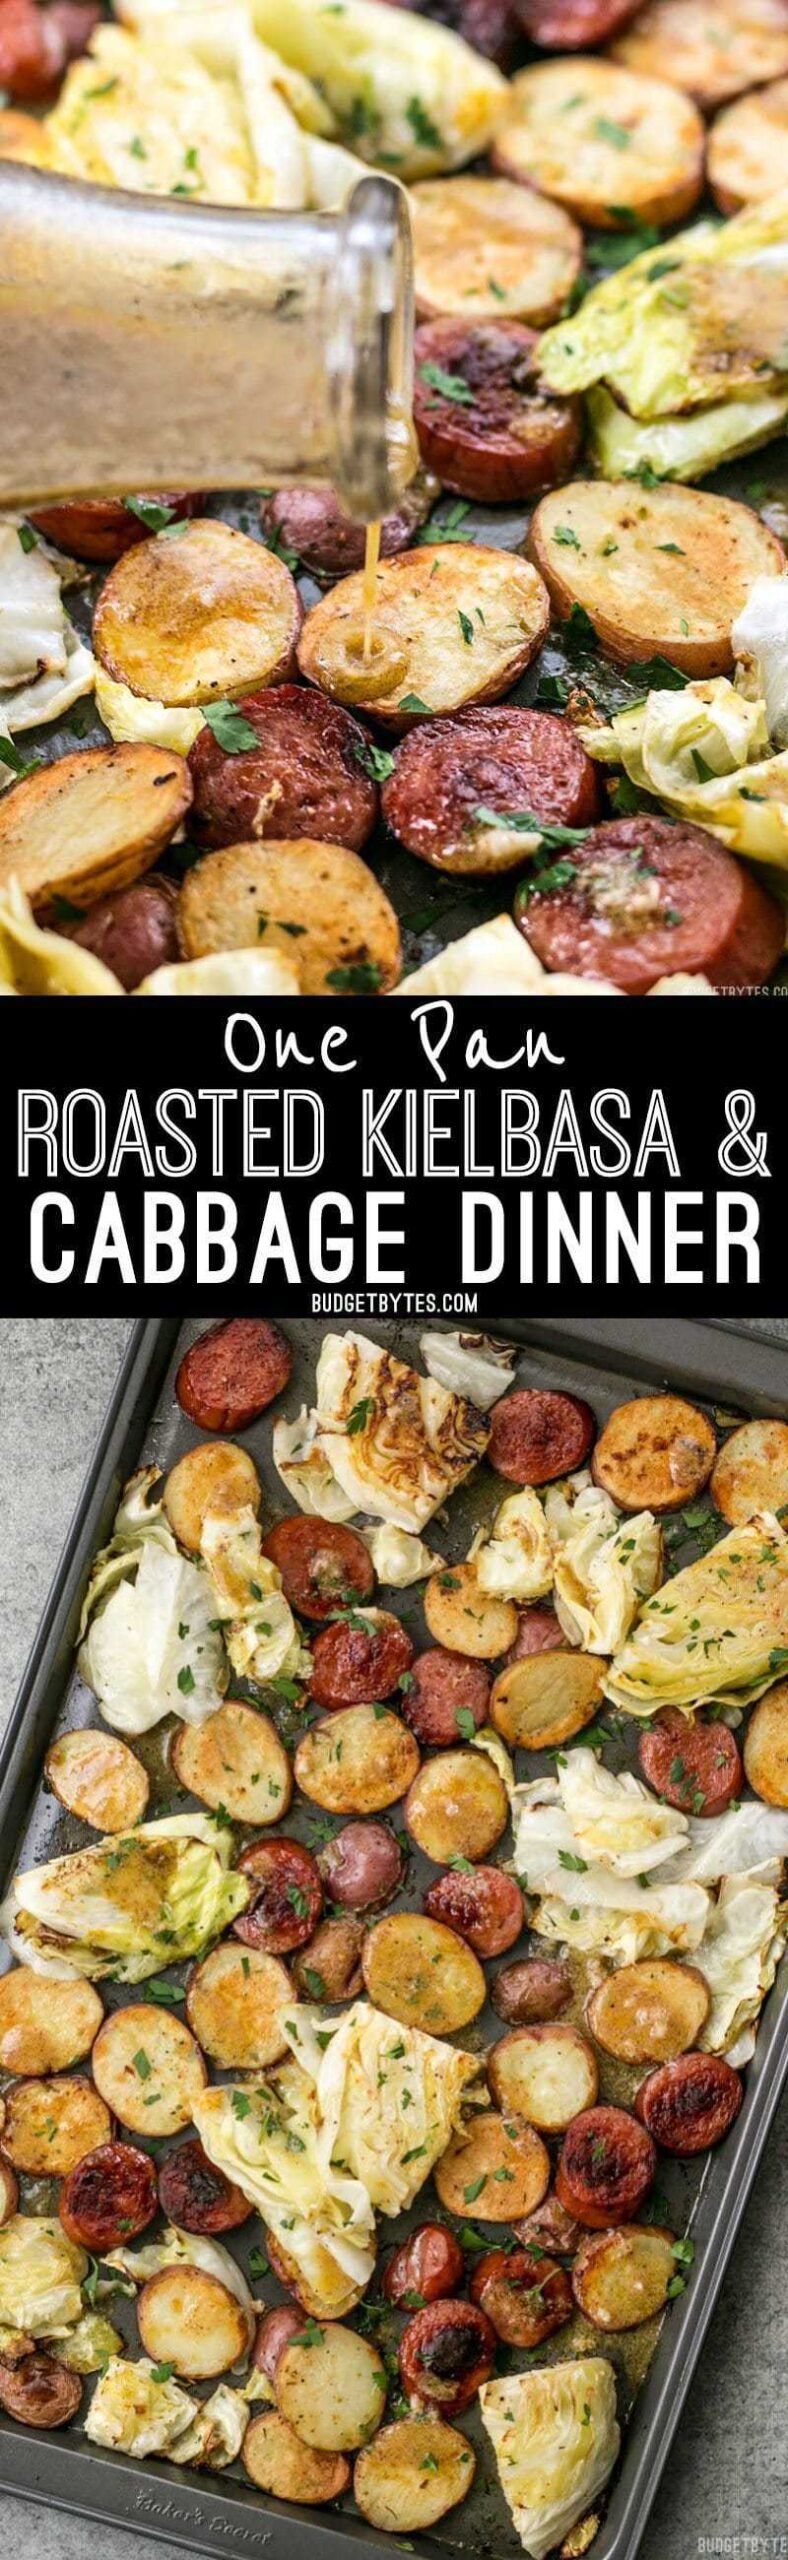 This One Pan Roasted Kielbasa and Cabbage Dinner comes together in minutes and is full of flavor and comfort. An easy weeknight dinner! BudgetBytes.com